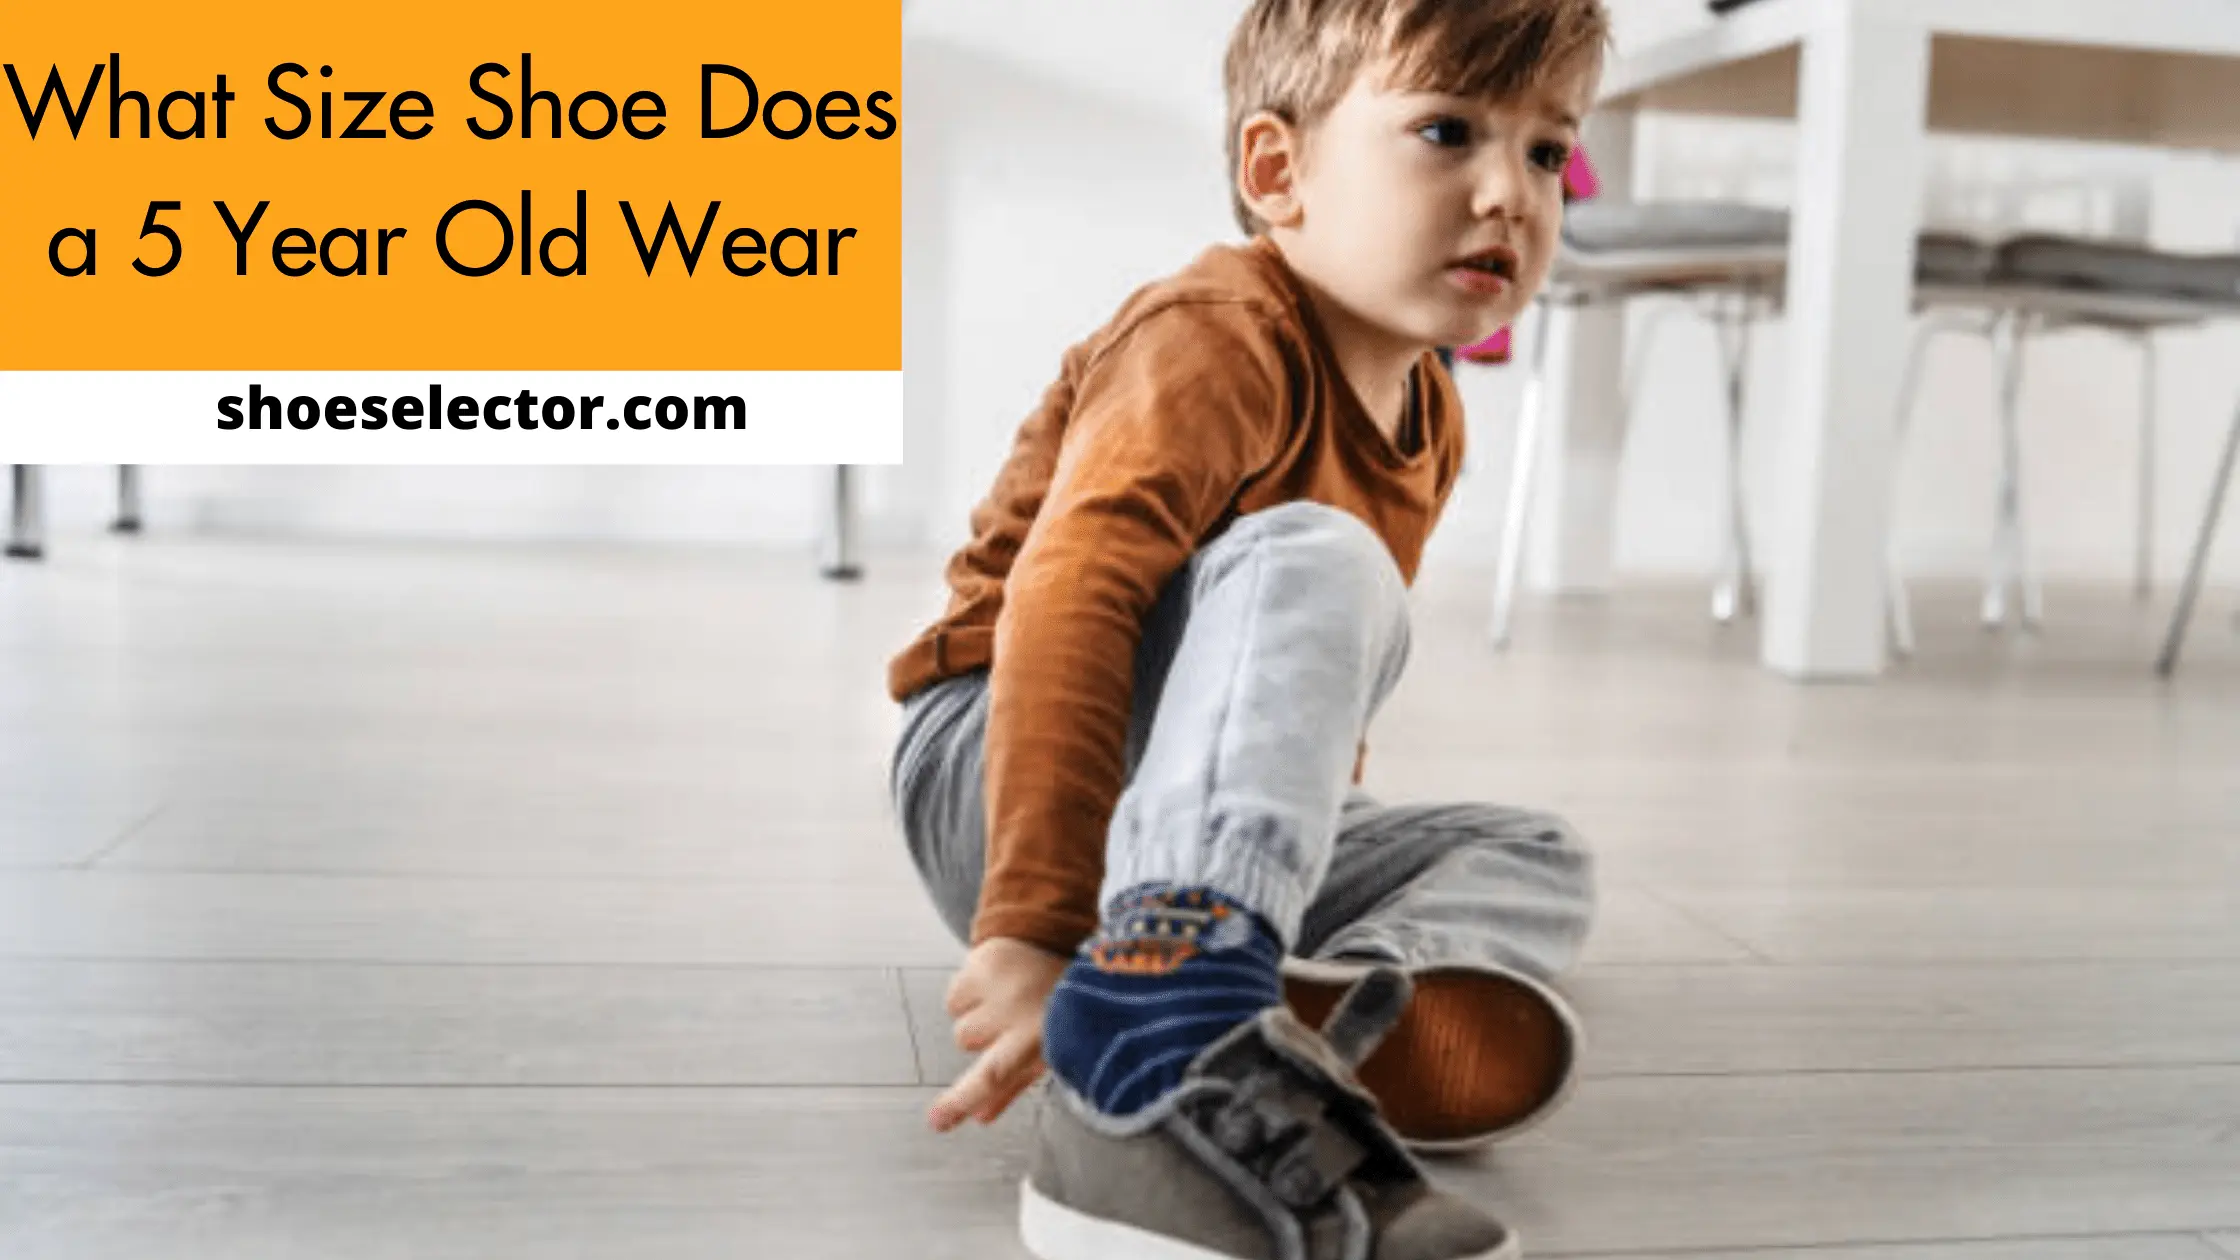 What Size Shoe Does a 5 Year Old Wear?